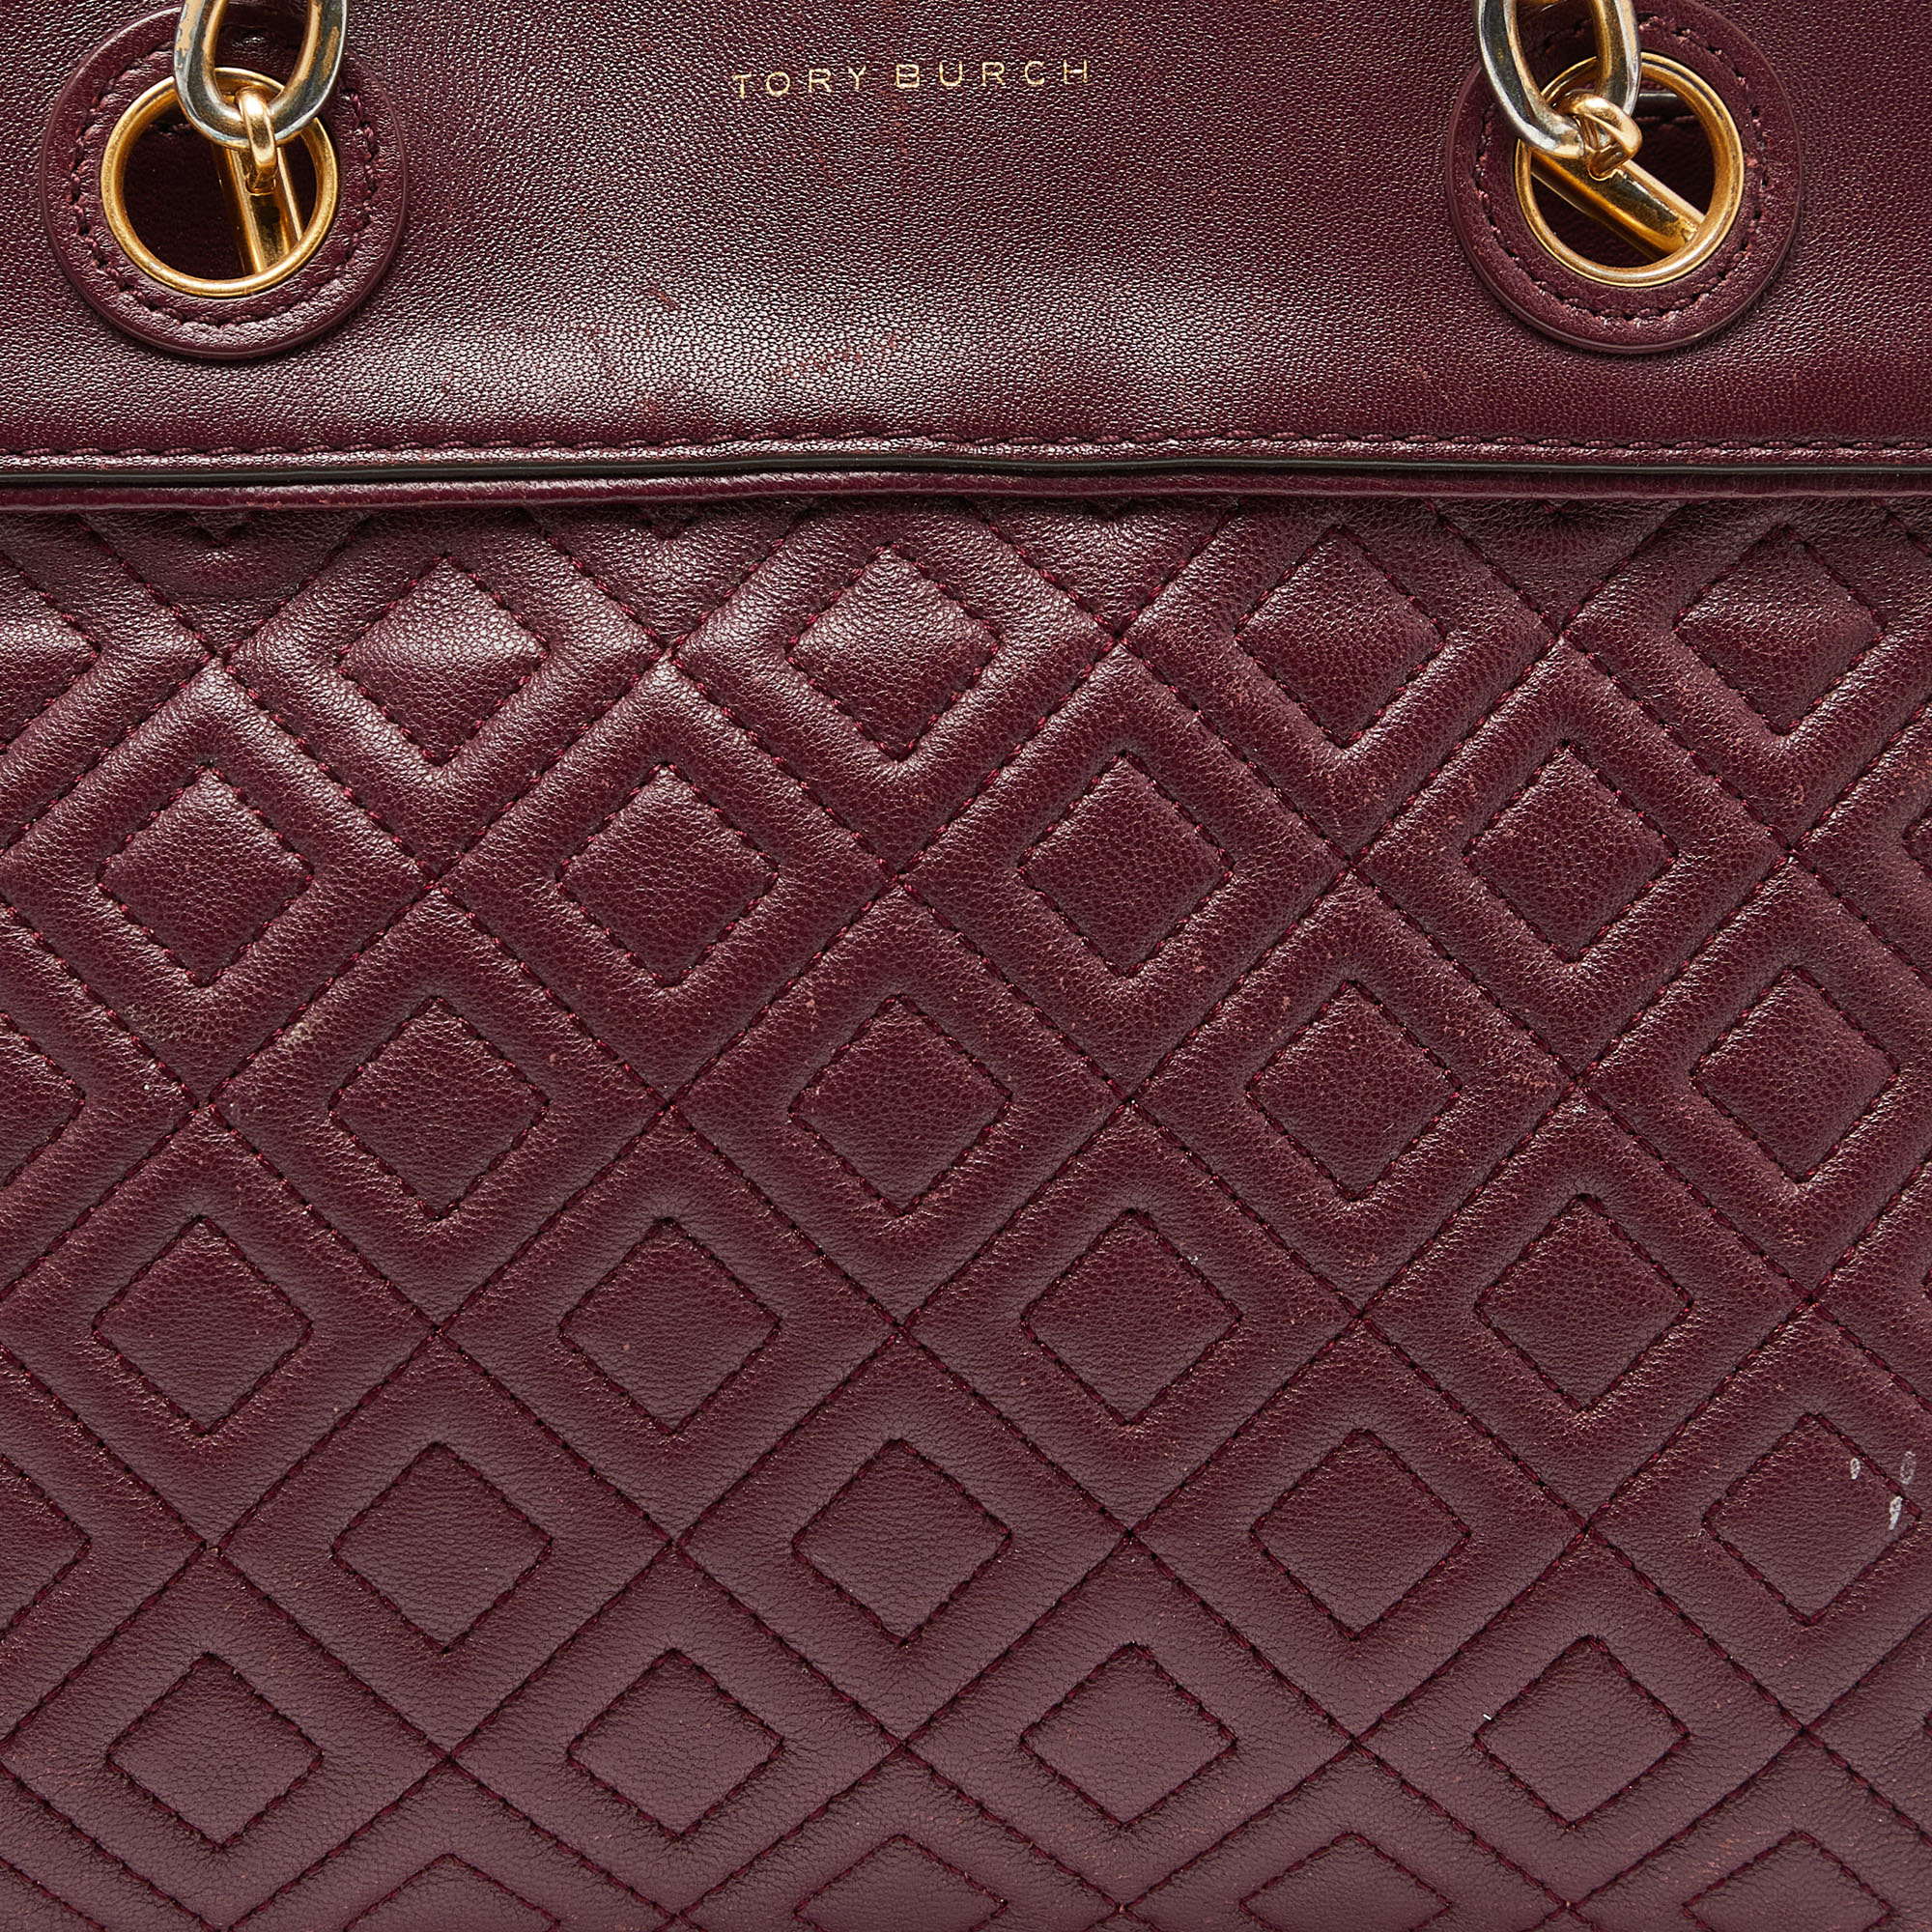 Tory Burch Burgundy Quilted Leather Fleming Satchel